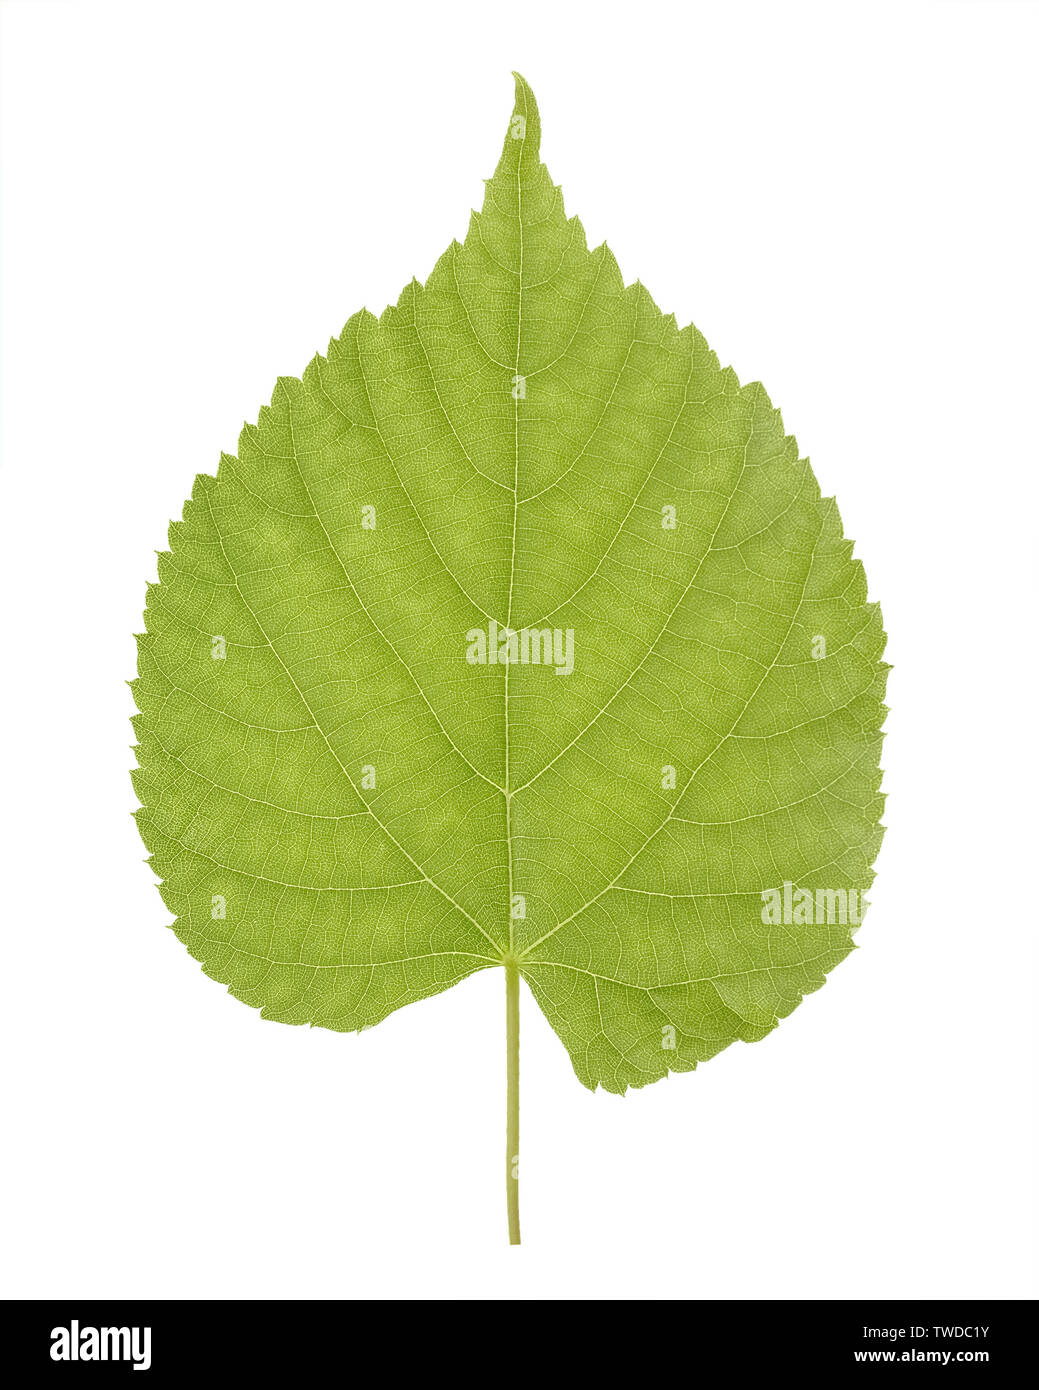 Green leaf of Linden or Tilia, commonly called lime trees, or lime bushes of the family Tiliaceae or Malvaceae isolated on white background Stock Photo